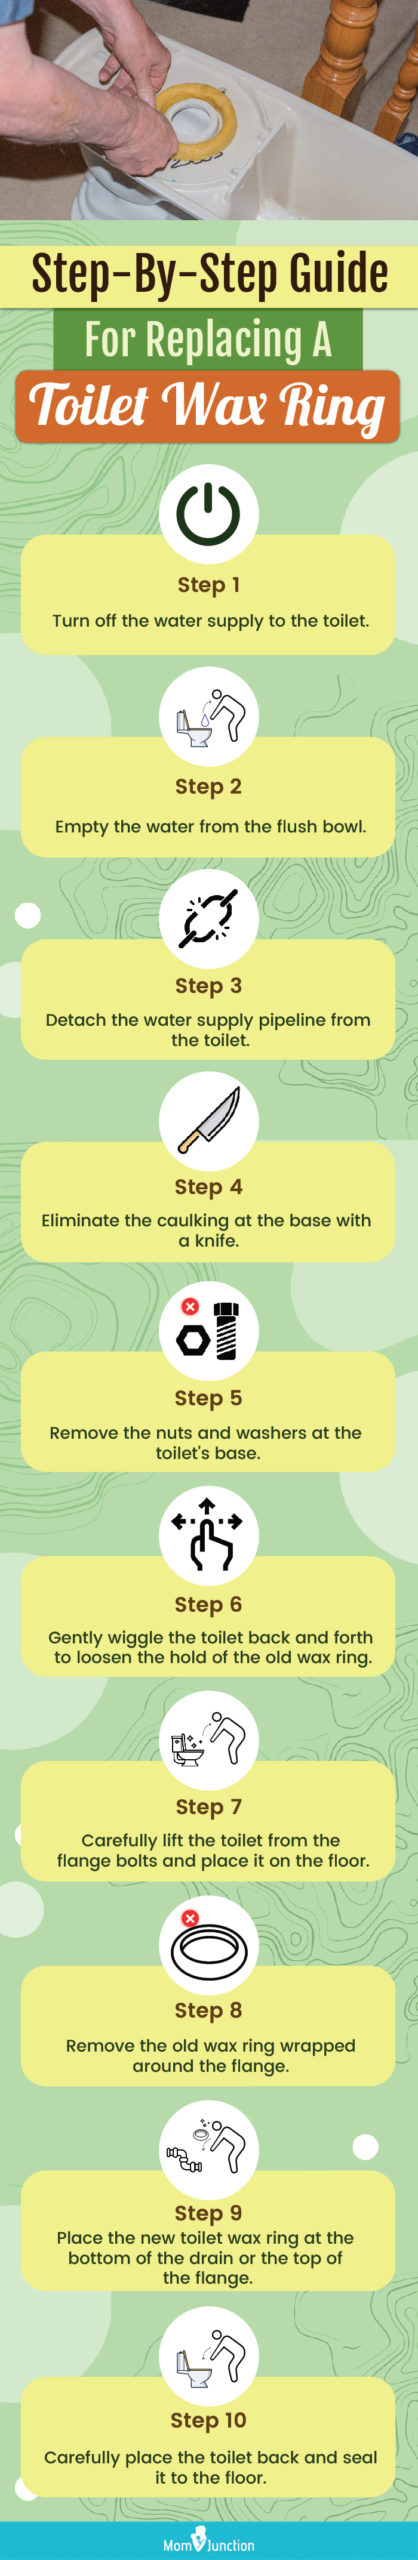 Step By Step Guide For Replacing A Toilet Wax Ring (infographic)